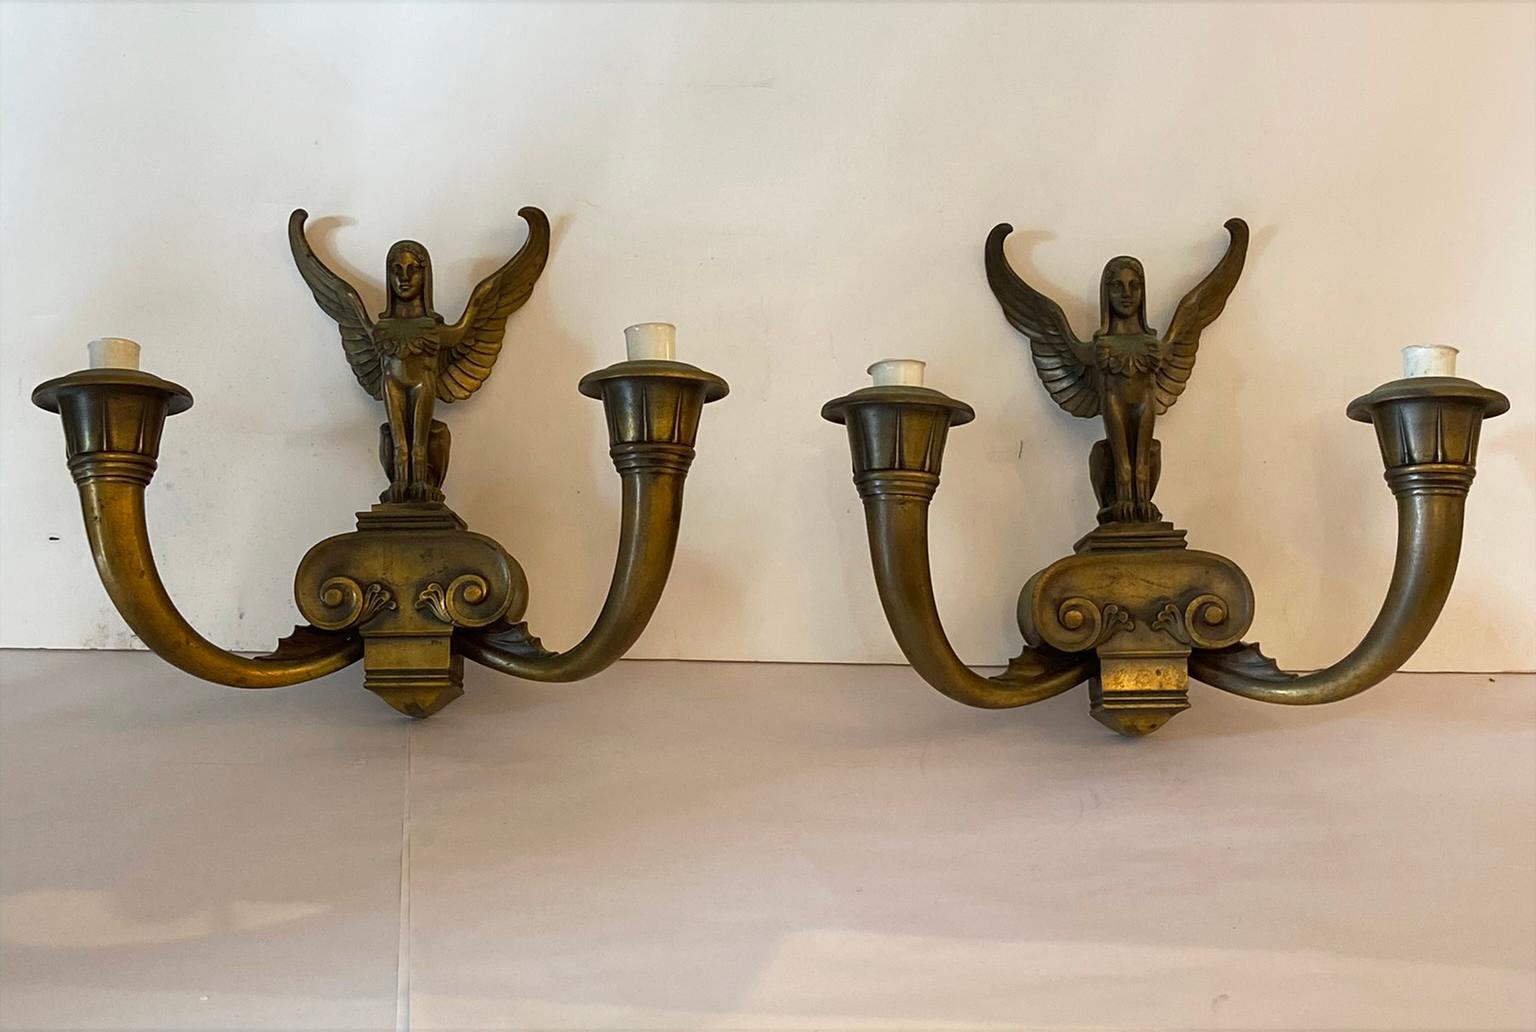 An intriguing pair of sconces from the art deco period… incredible detail cast in bronze ..each winged figure holding two lights.. And original bronze patina with no restorations… Very good condition